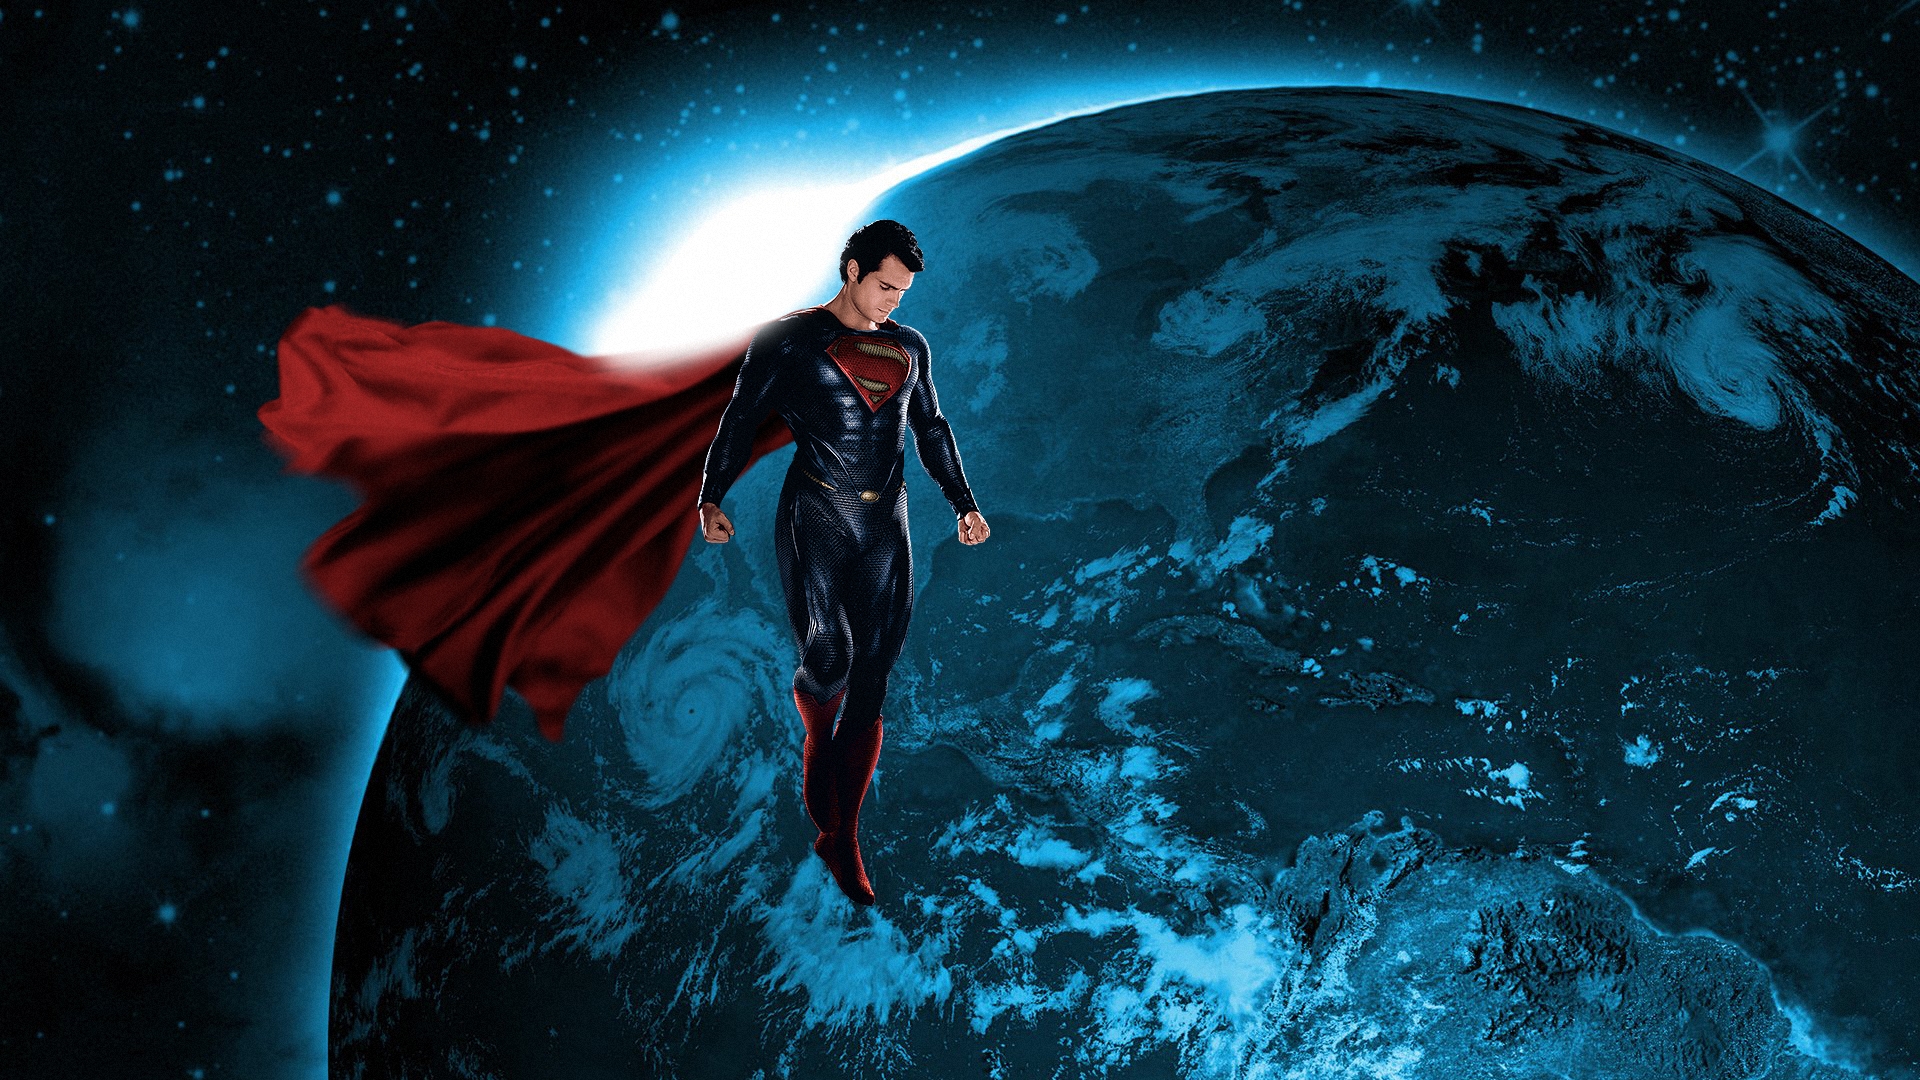 superman wallpaper hd for android,cg artwork,fictional character,sky,space,illustration